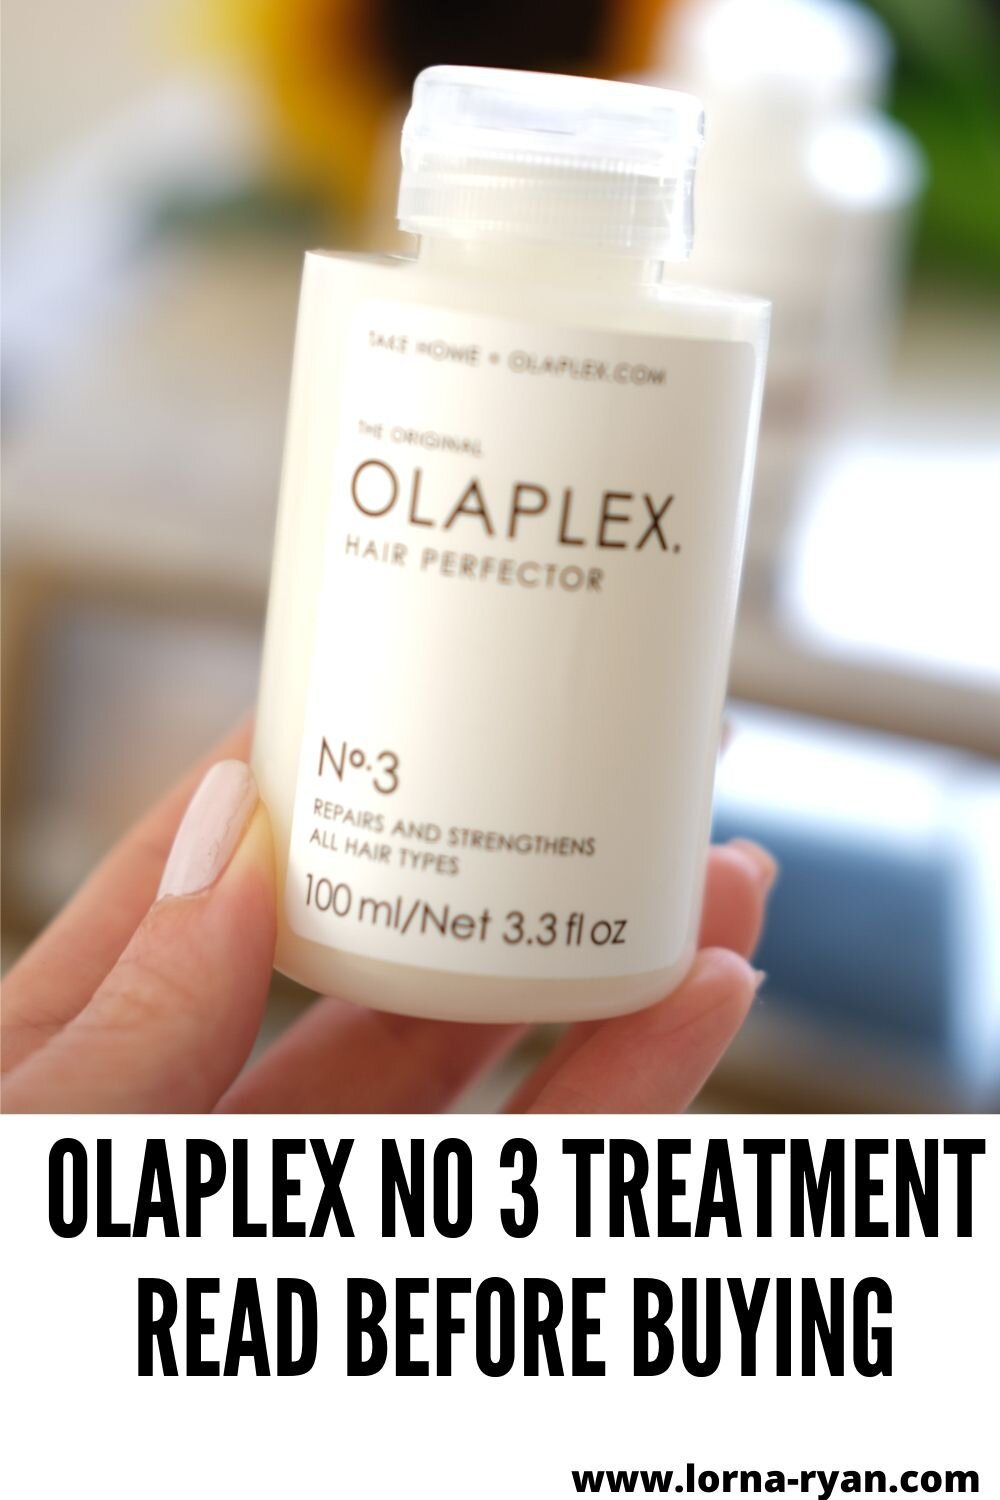 Olaplex Before and After Hair Review - Olaplex No. 3 Hair Perfector, Olaplex No. 6 Bond Smoother and Olaplex No. 7 Bonding Oil. This is the ultimate guide on How to Use Olaplex No. 3 at Home. Like can you leave it overnight? How long does it last? H…